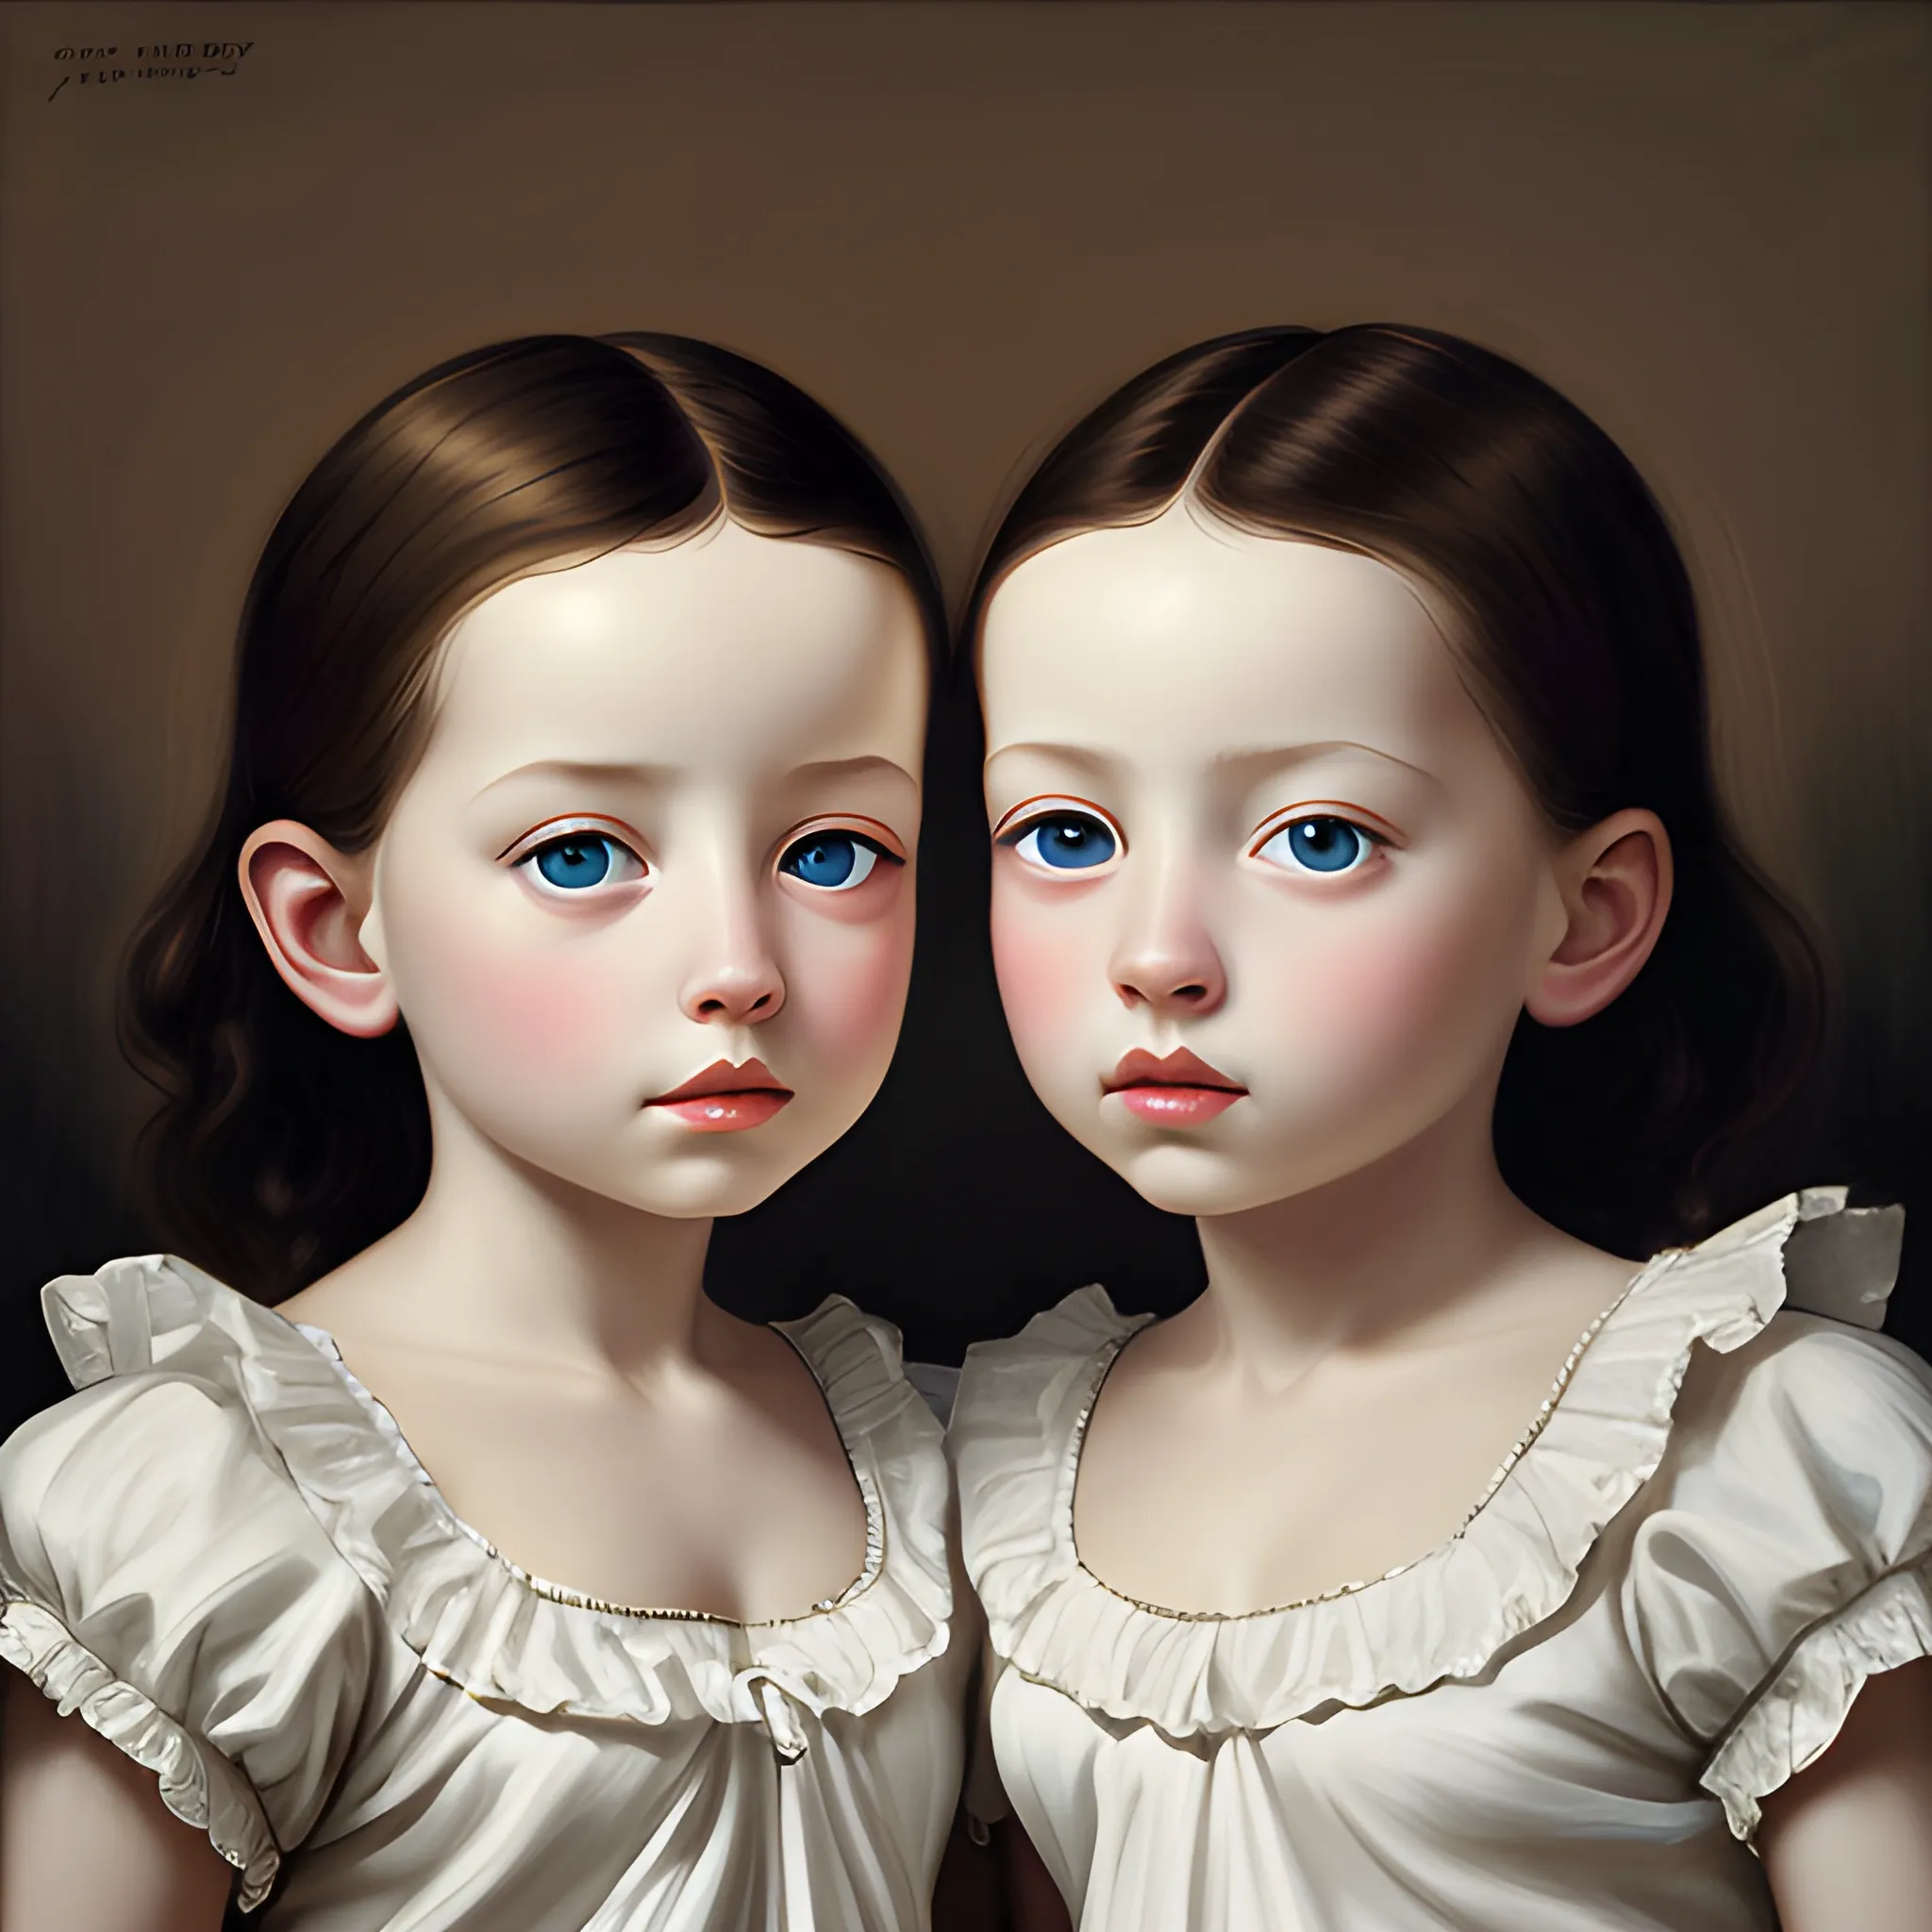 high quality high detail painting by dali, hd, portrait of twins